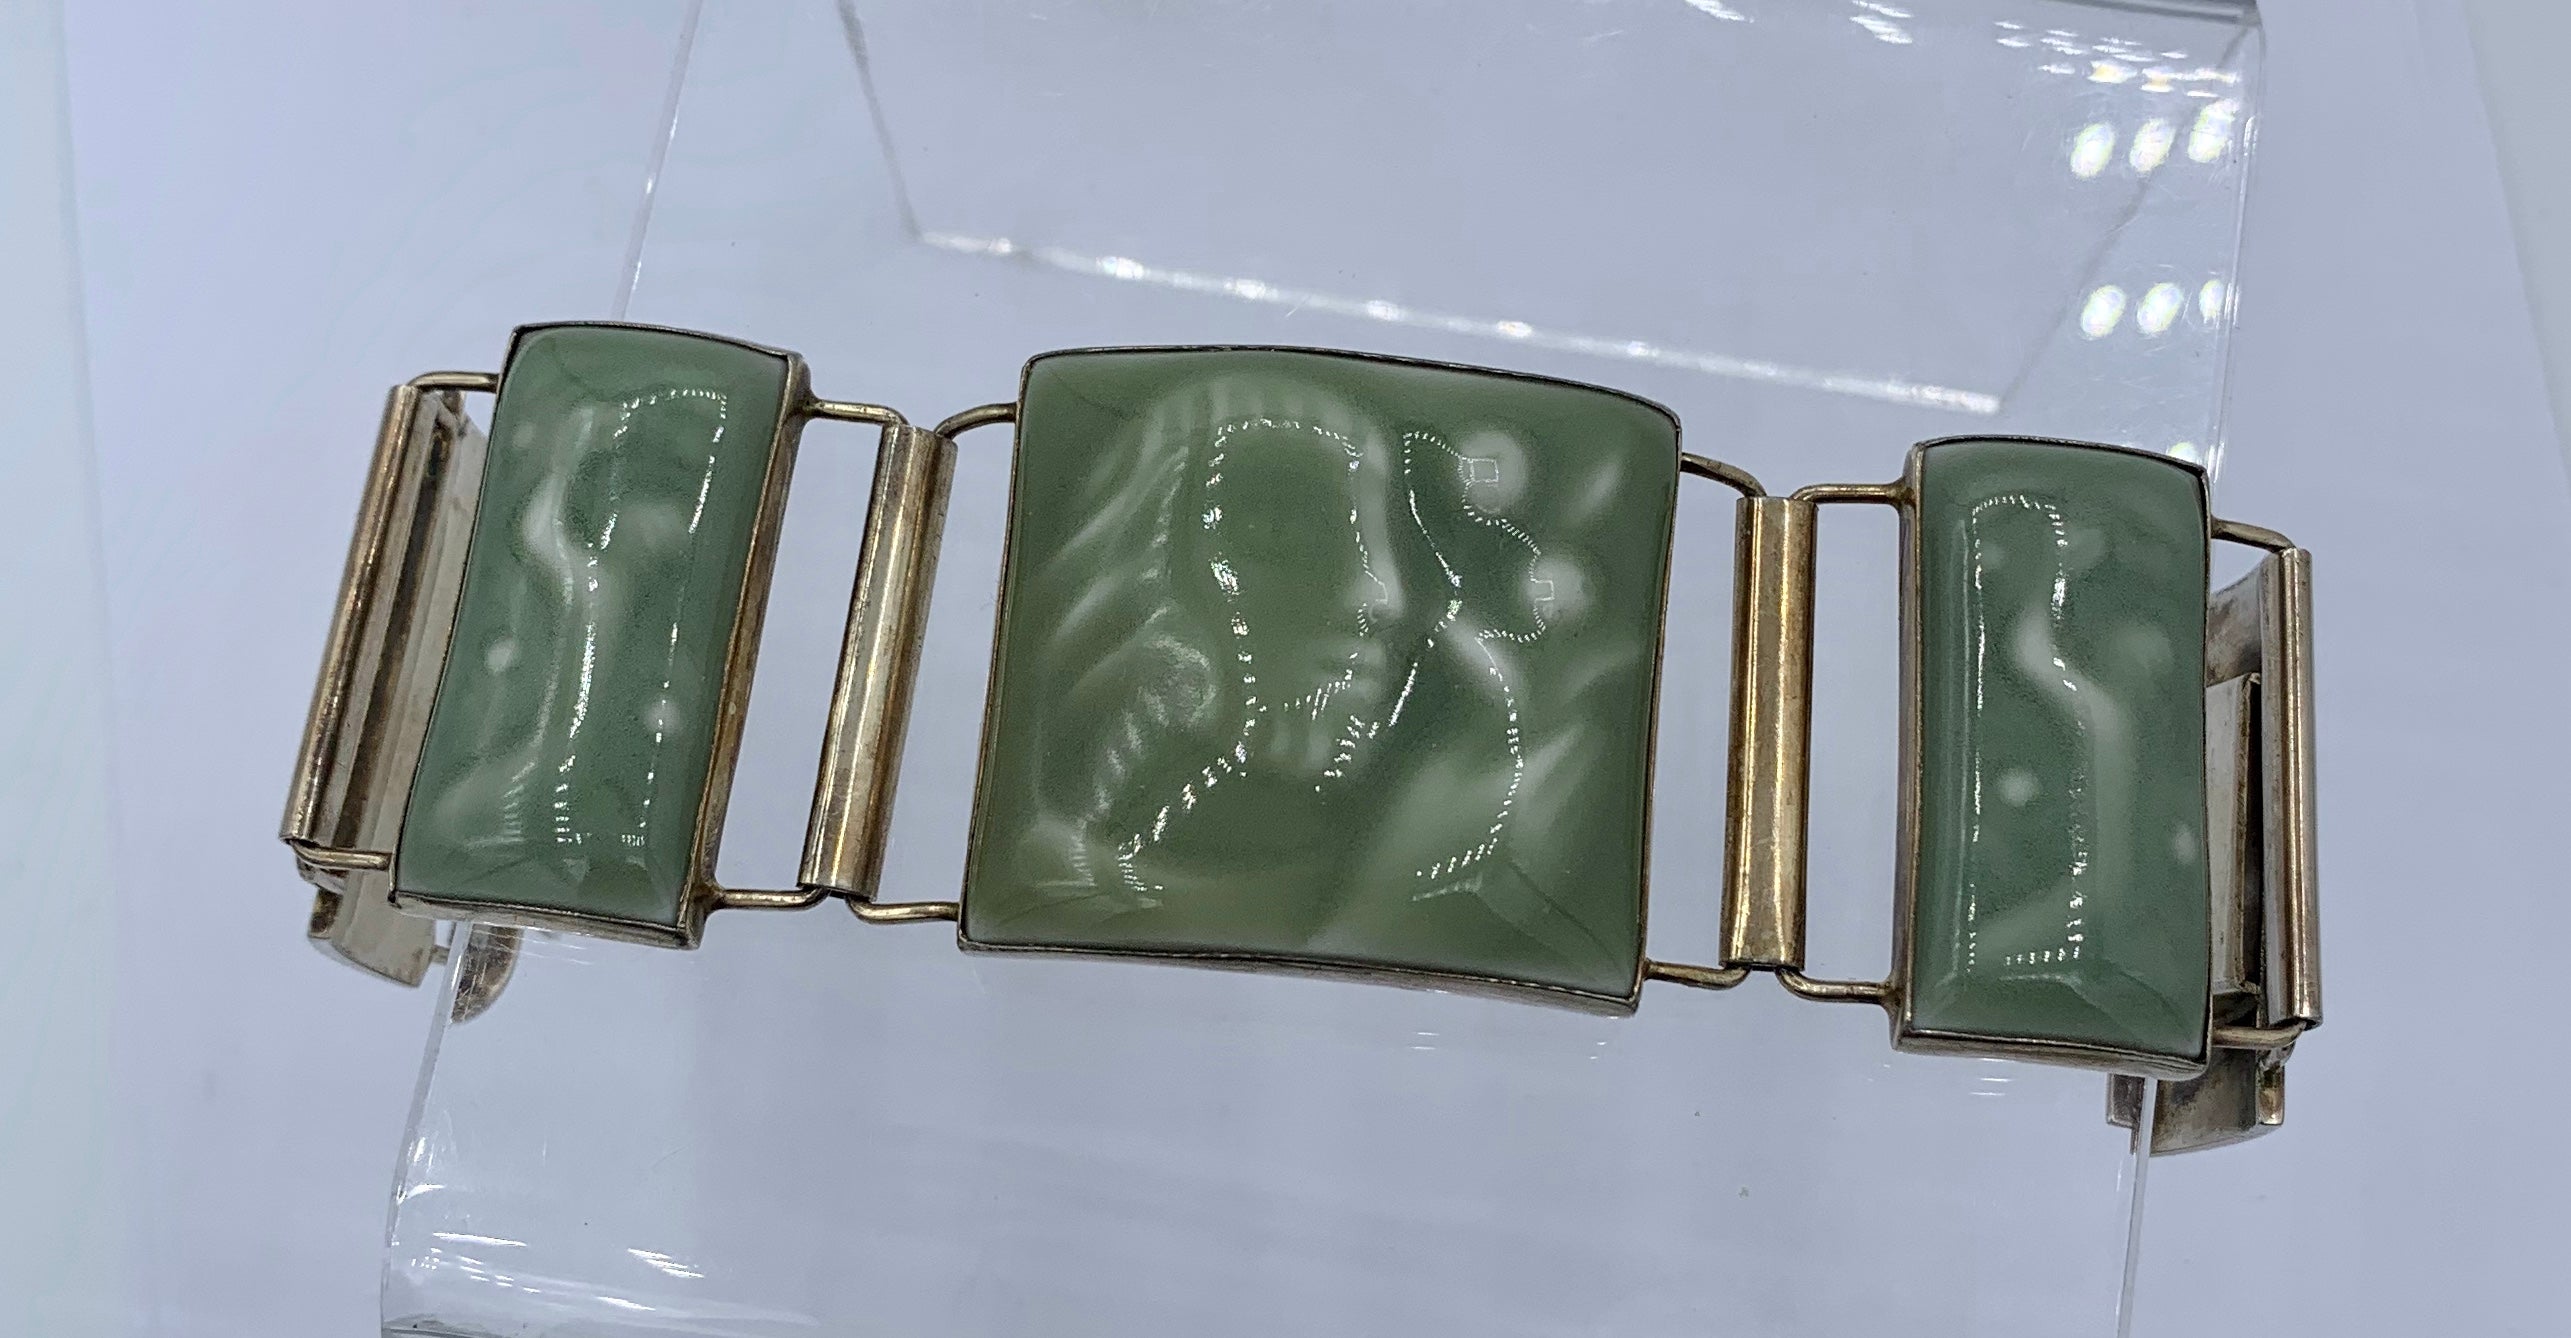 Royal Copenhagen Porcelain celedon green glaze panels by Jais Nielsen depicting a man with a flower bouquet and a kneeling woman are set in Sterling Silver in this extraordinary Mid-Century Modern Bracelet made by A. Dragsted of Denmark.  The